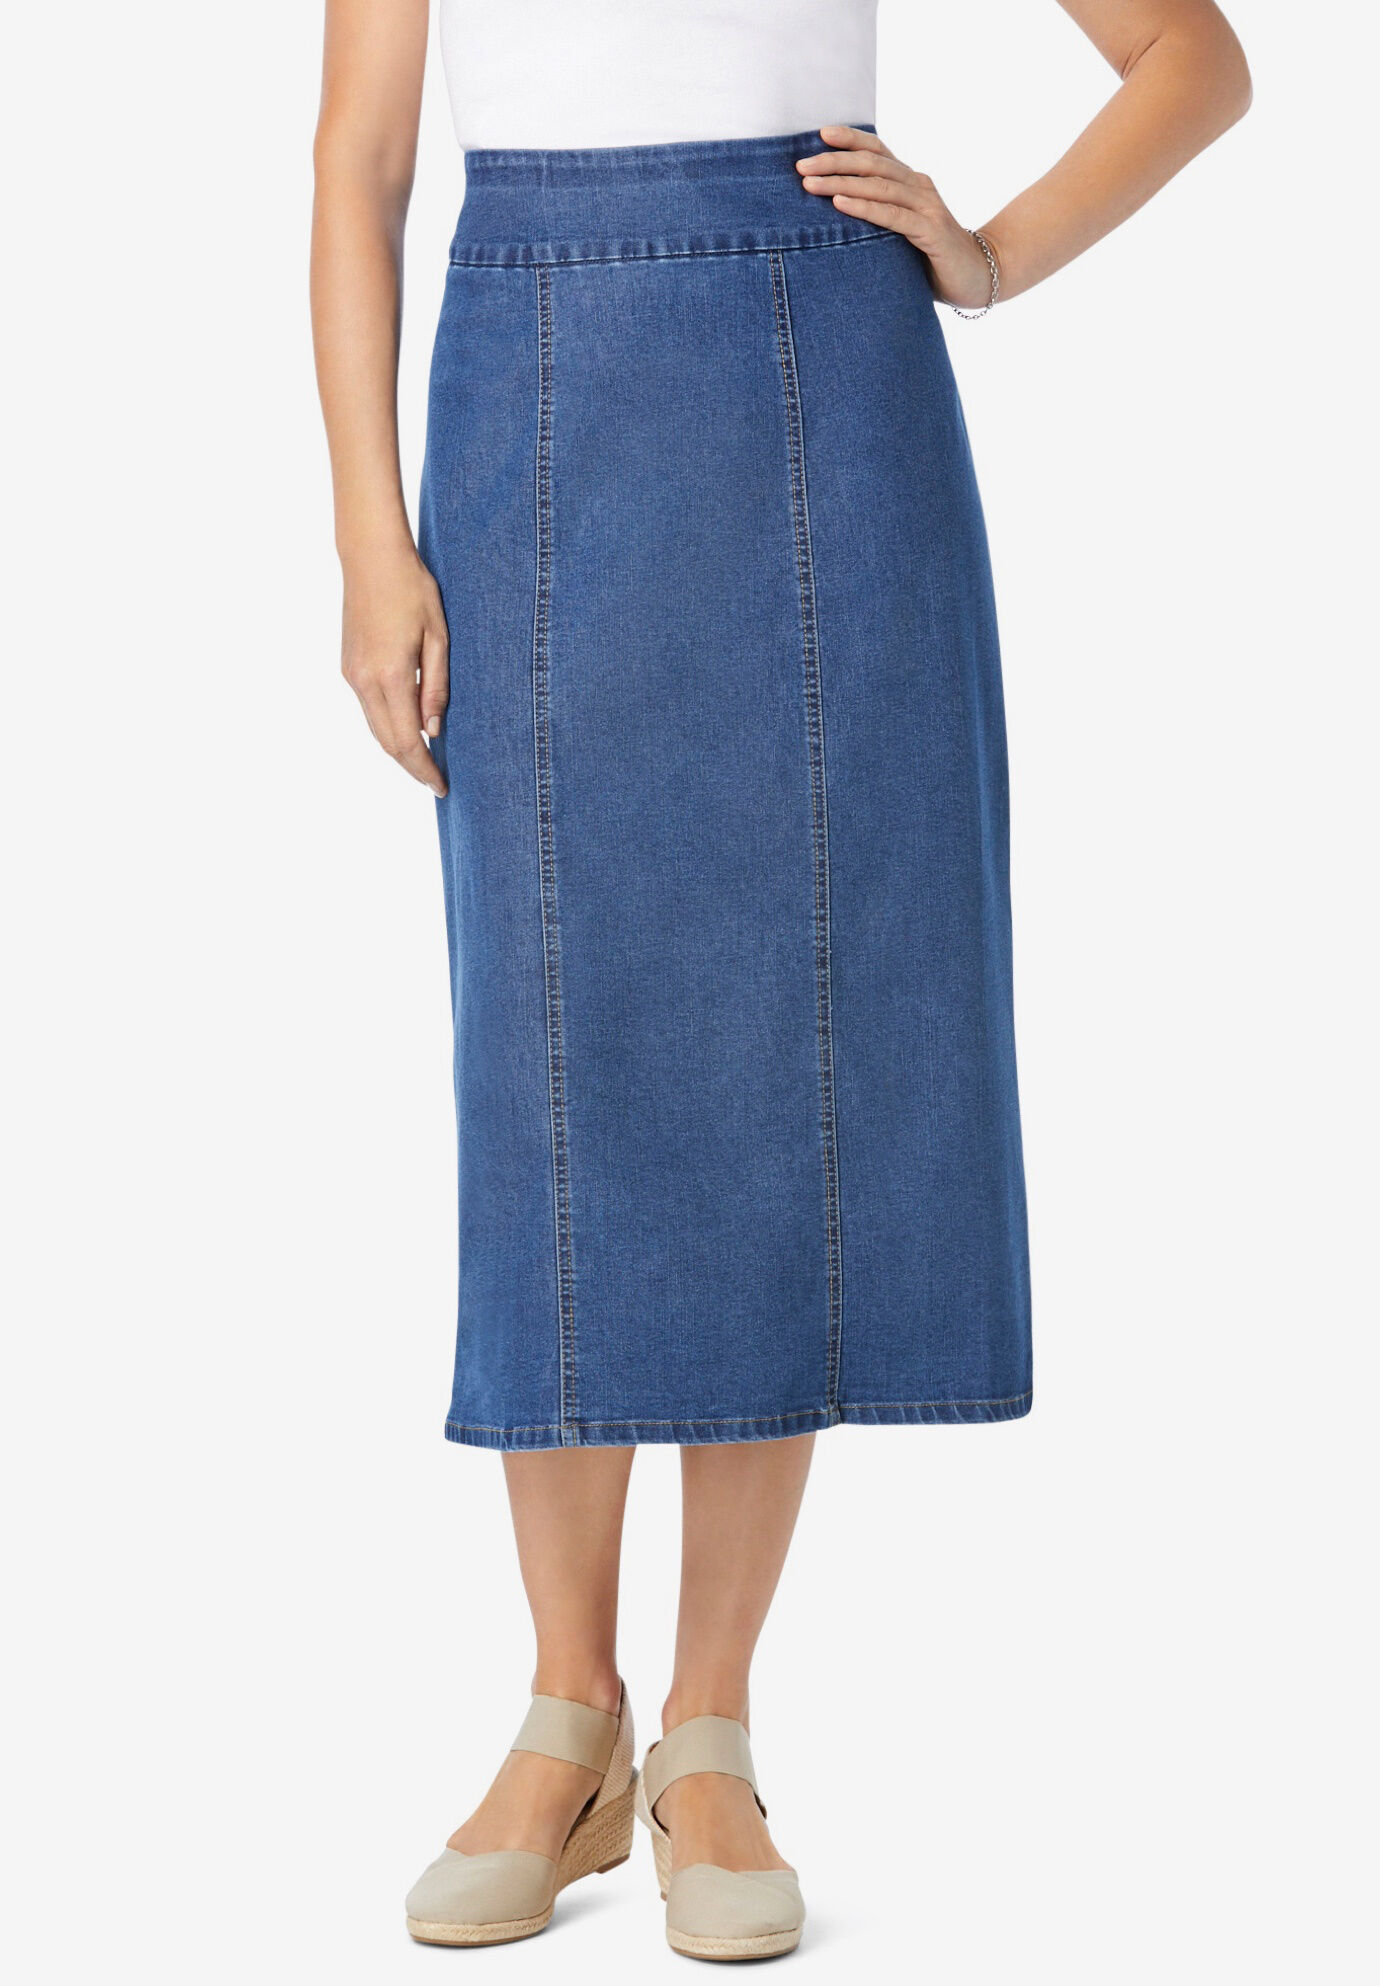 maxi denim skirts king size , Up to 70 